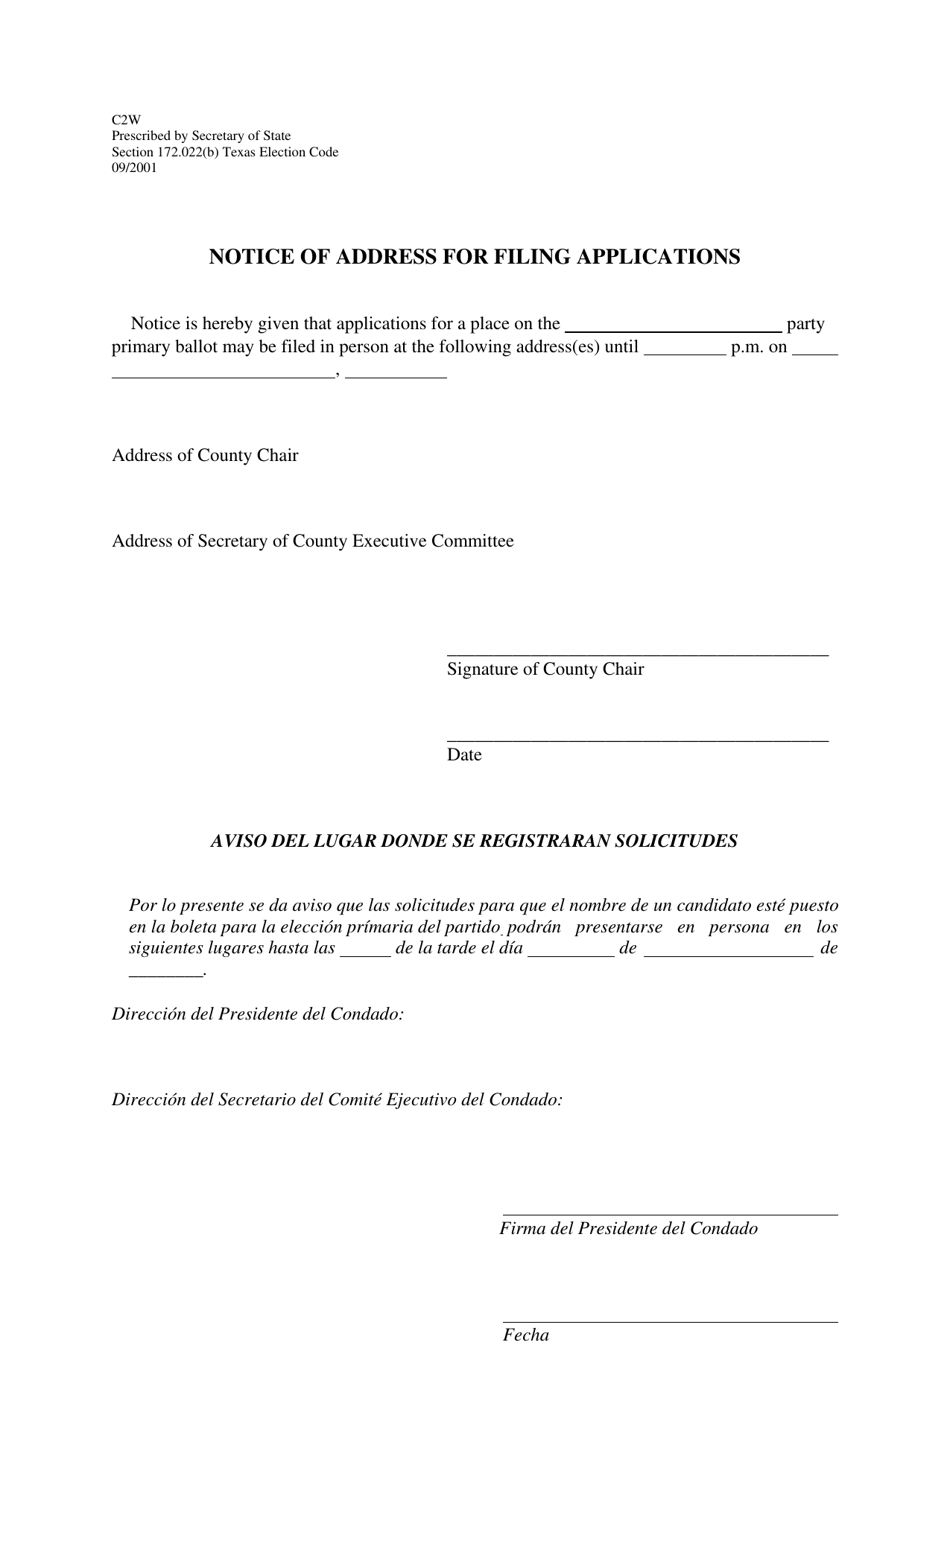 Form C2W Notice of Address for Filing Applications - Texas (English / Spanish), Page 1